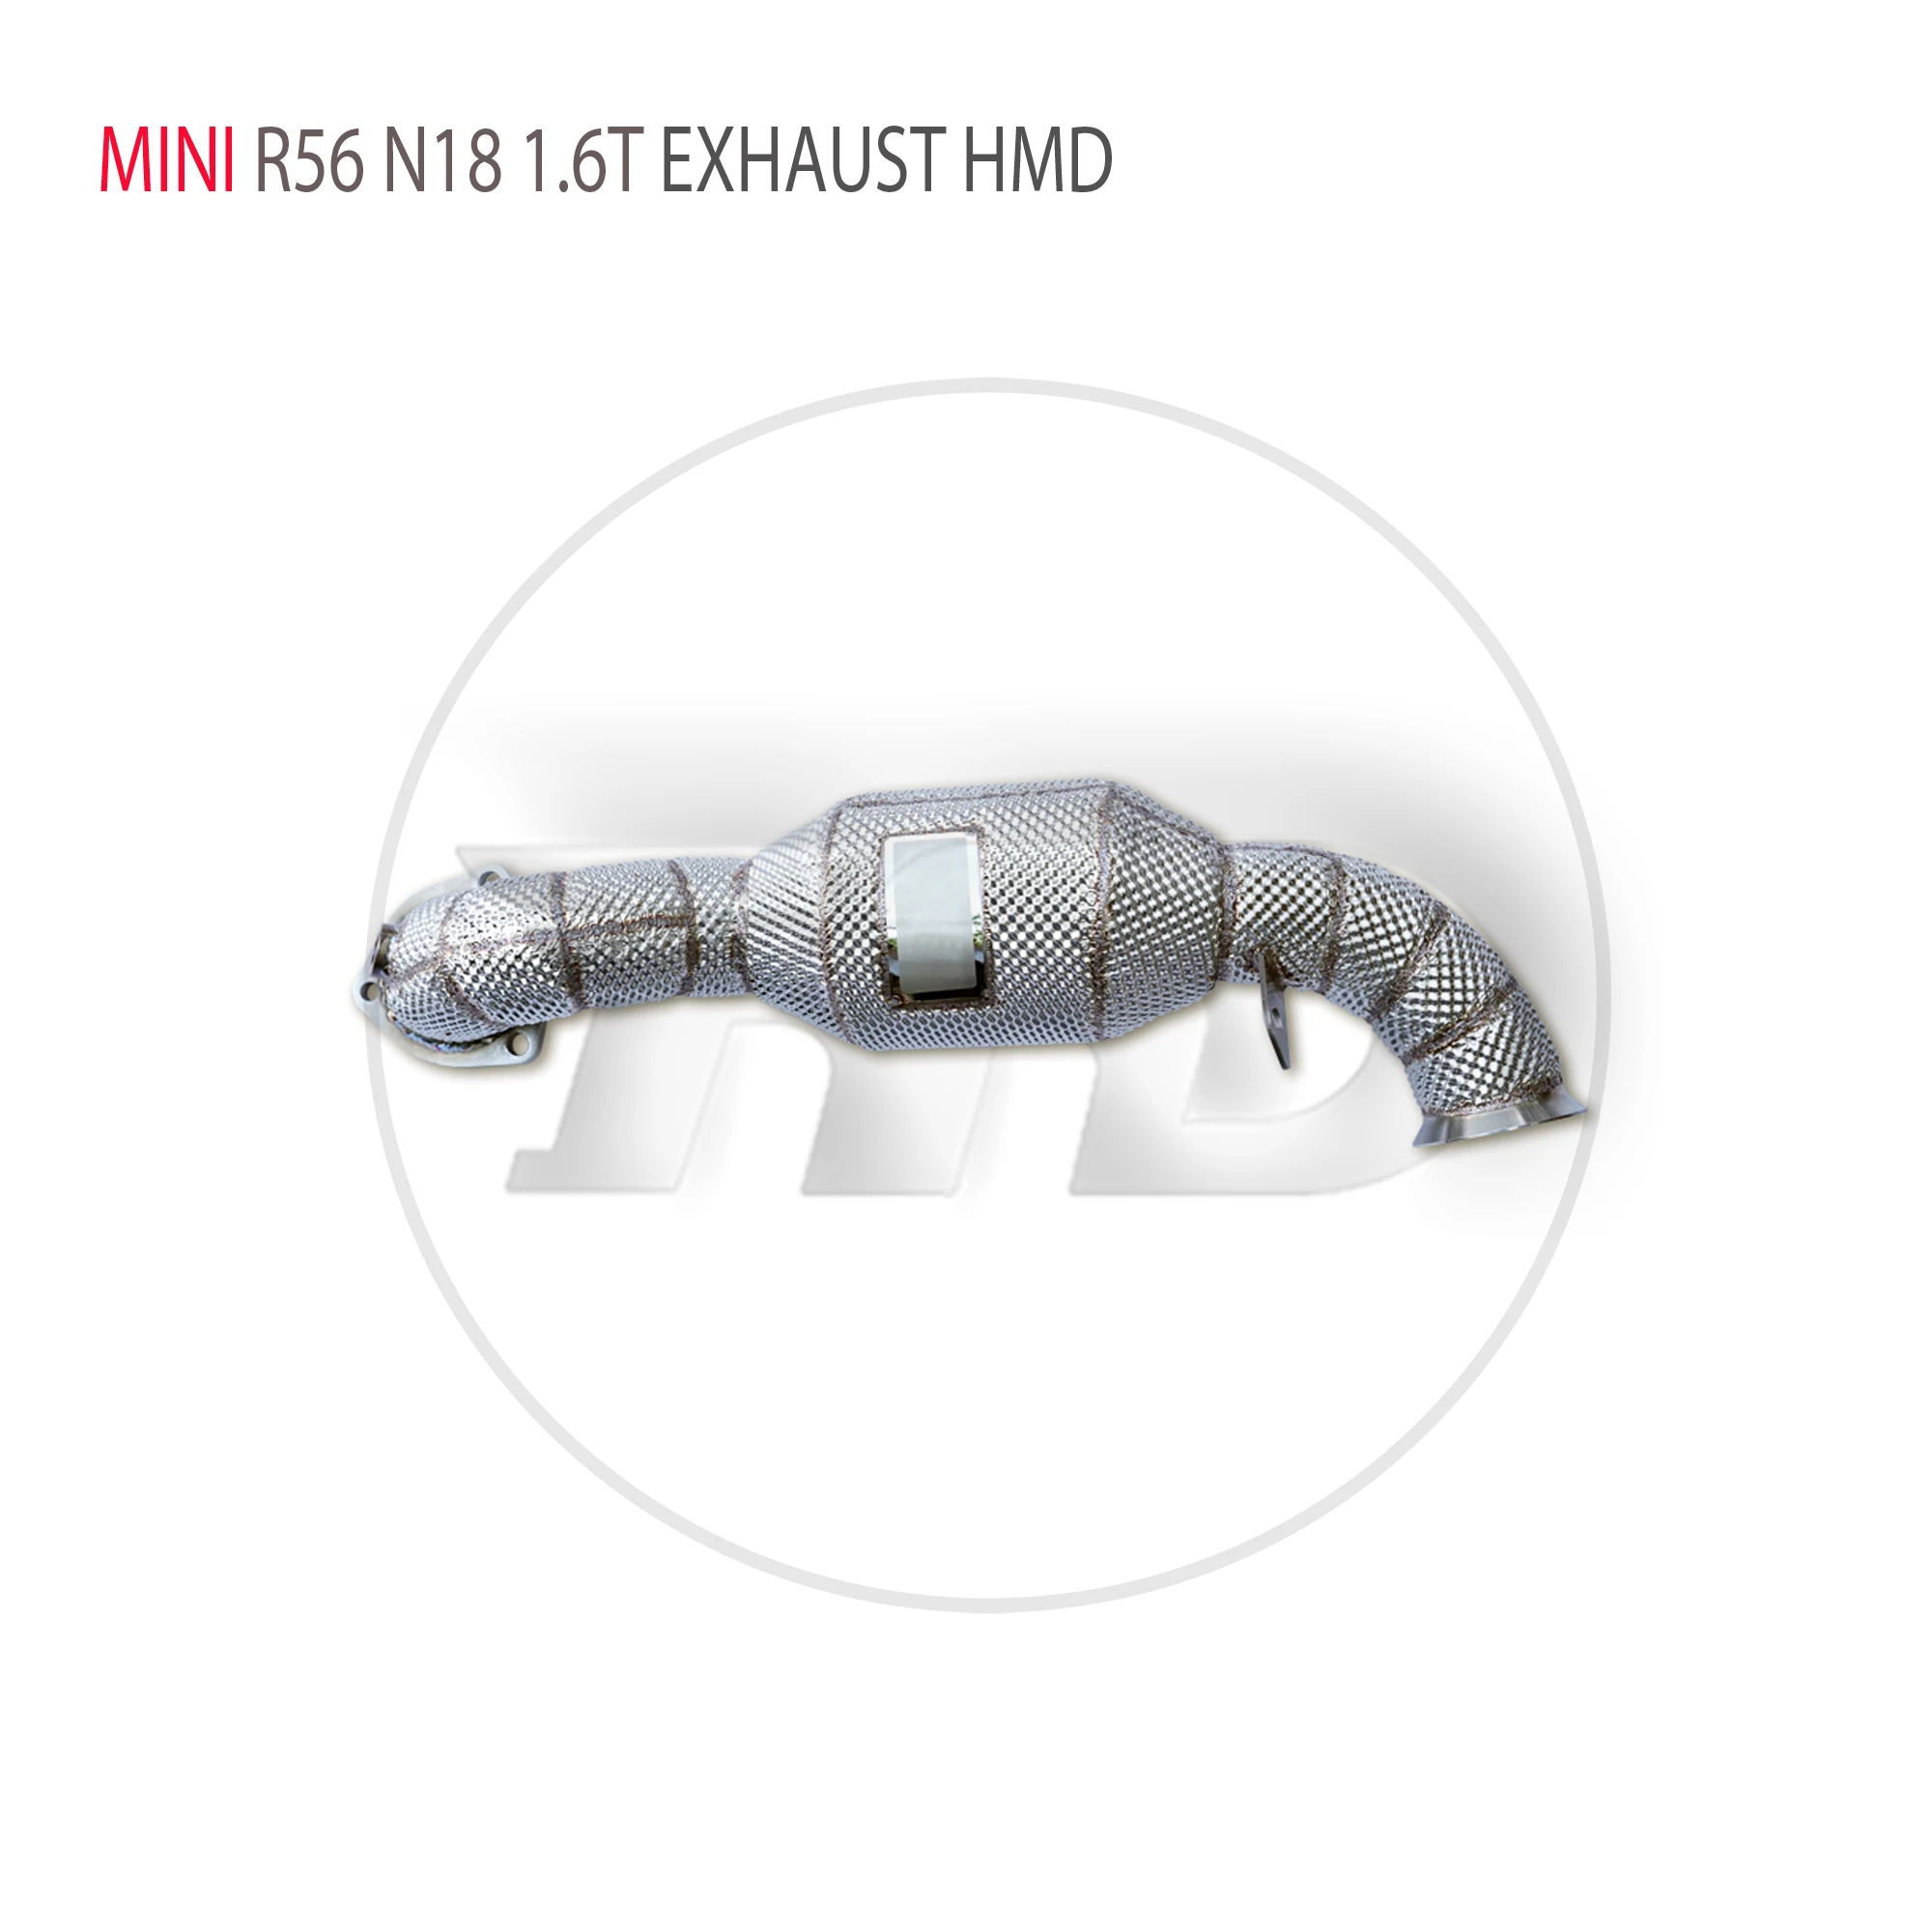 

HMD Exhaust Manifold High Flow Downpipe for MINI R56 N18 1.6T Car Accessories With Catalytic Converter Catless Pipe